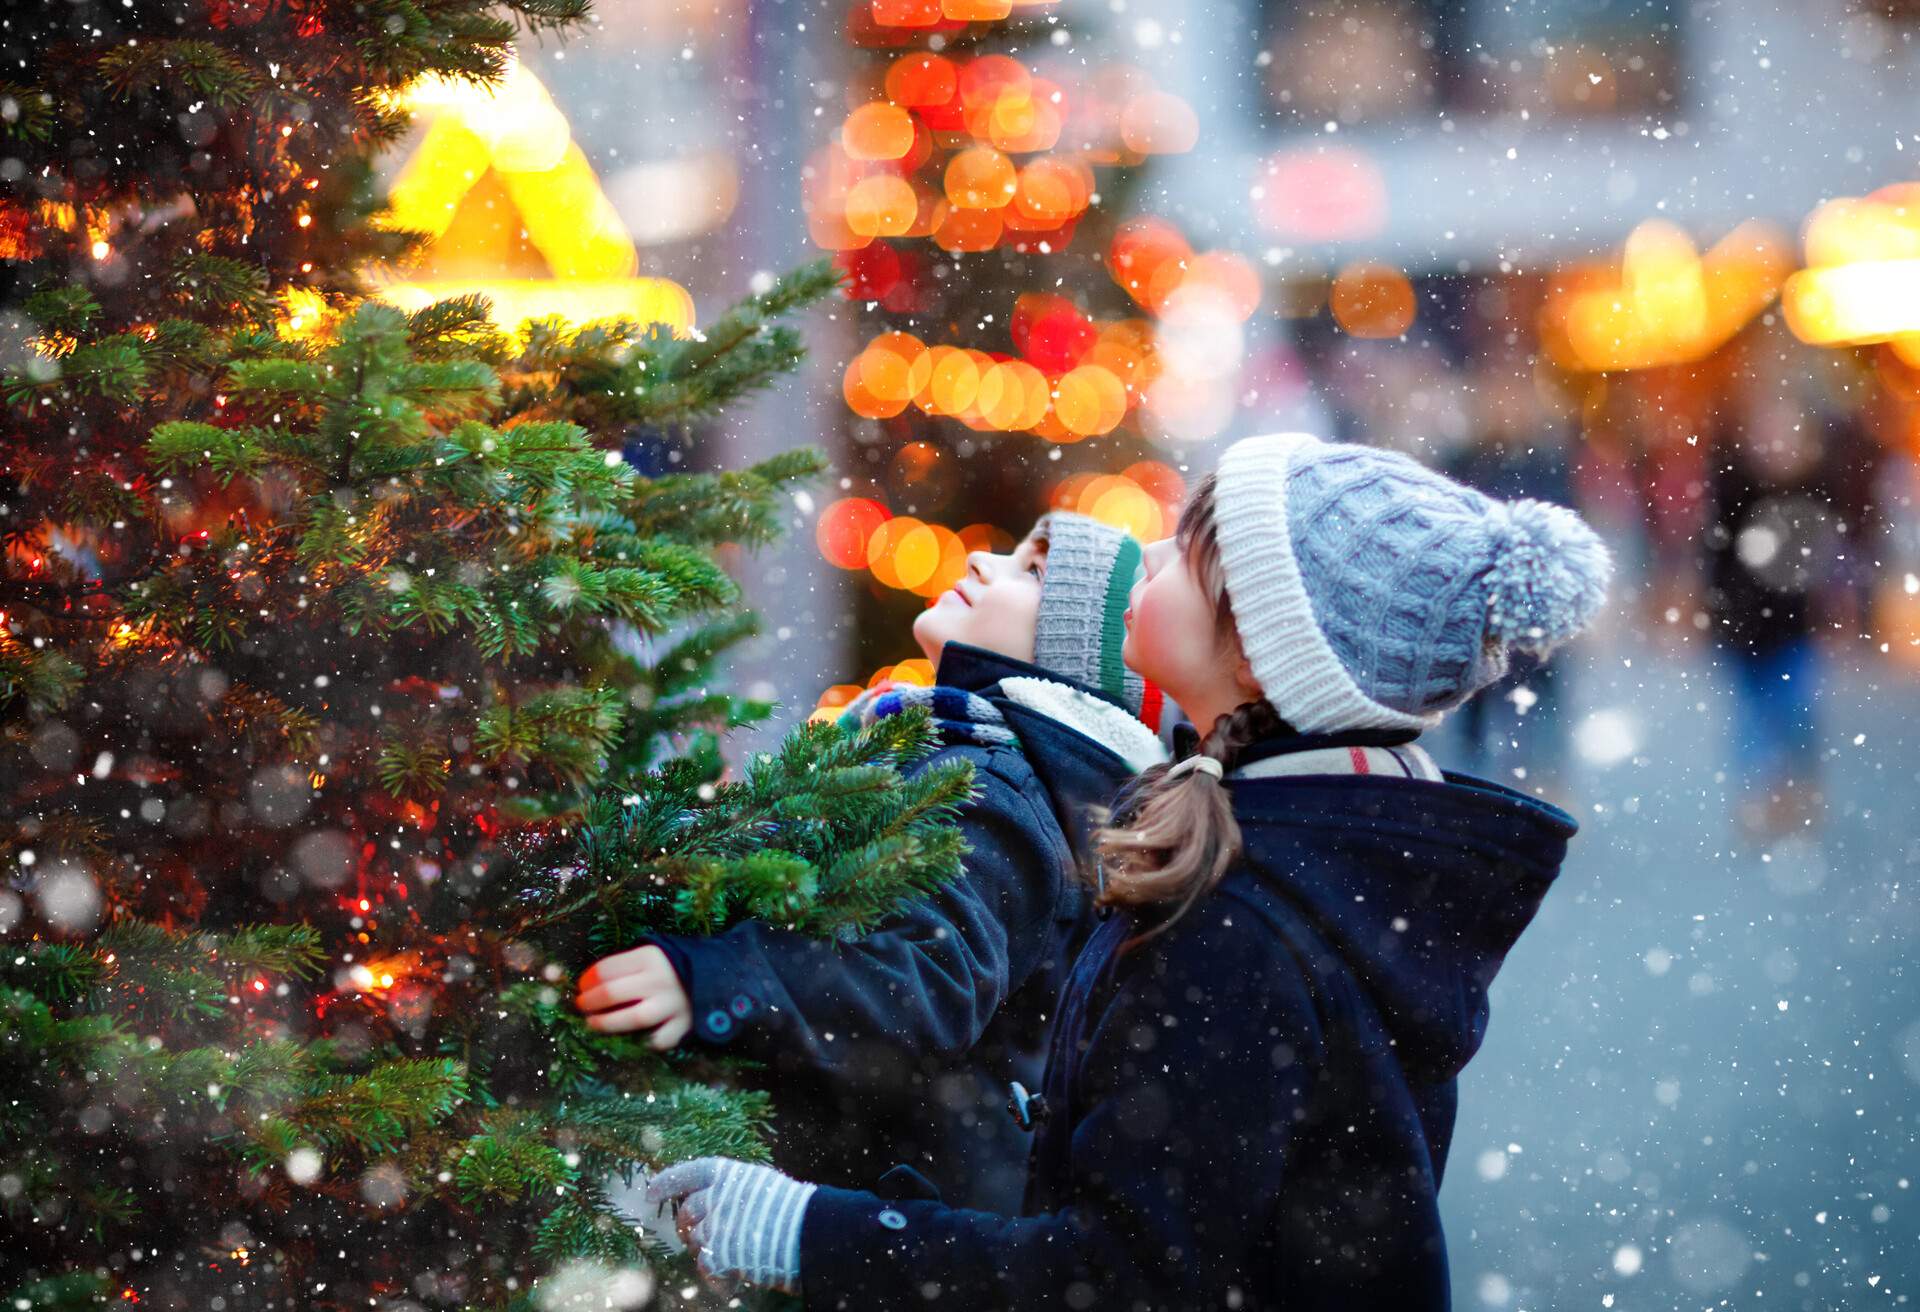 THEME_PEOPLE_KIDS_CHRISTMAN_MARKET_SNOW_TREE_GettyImages